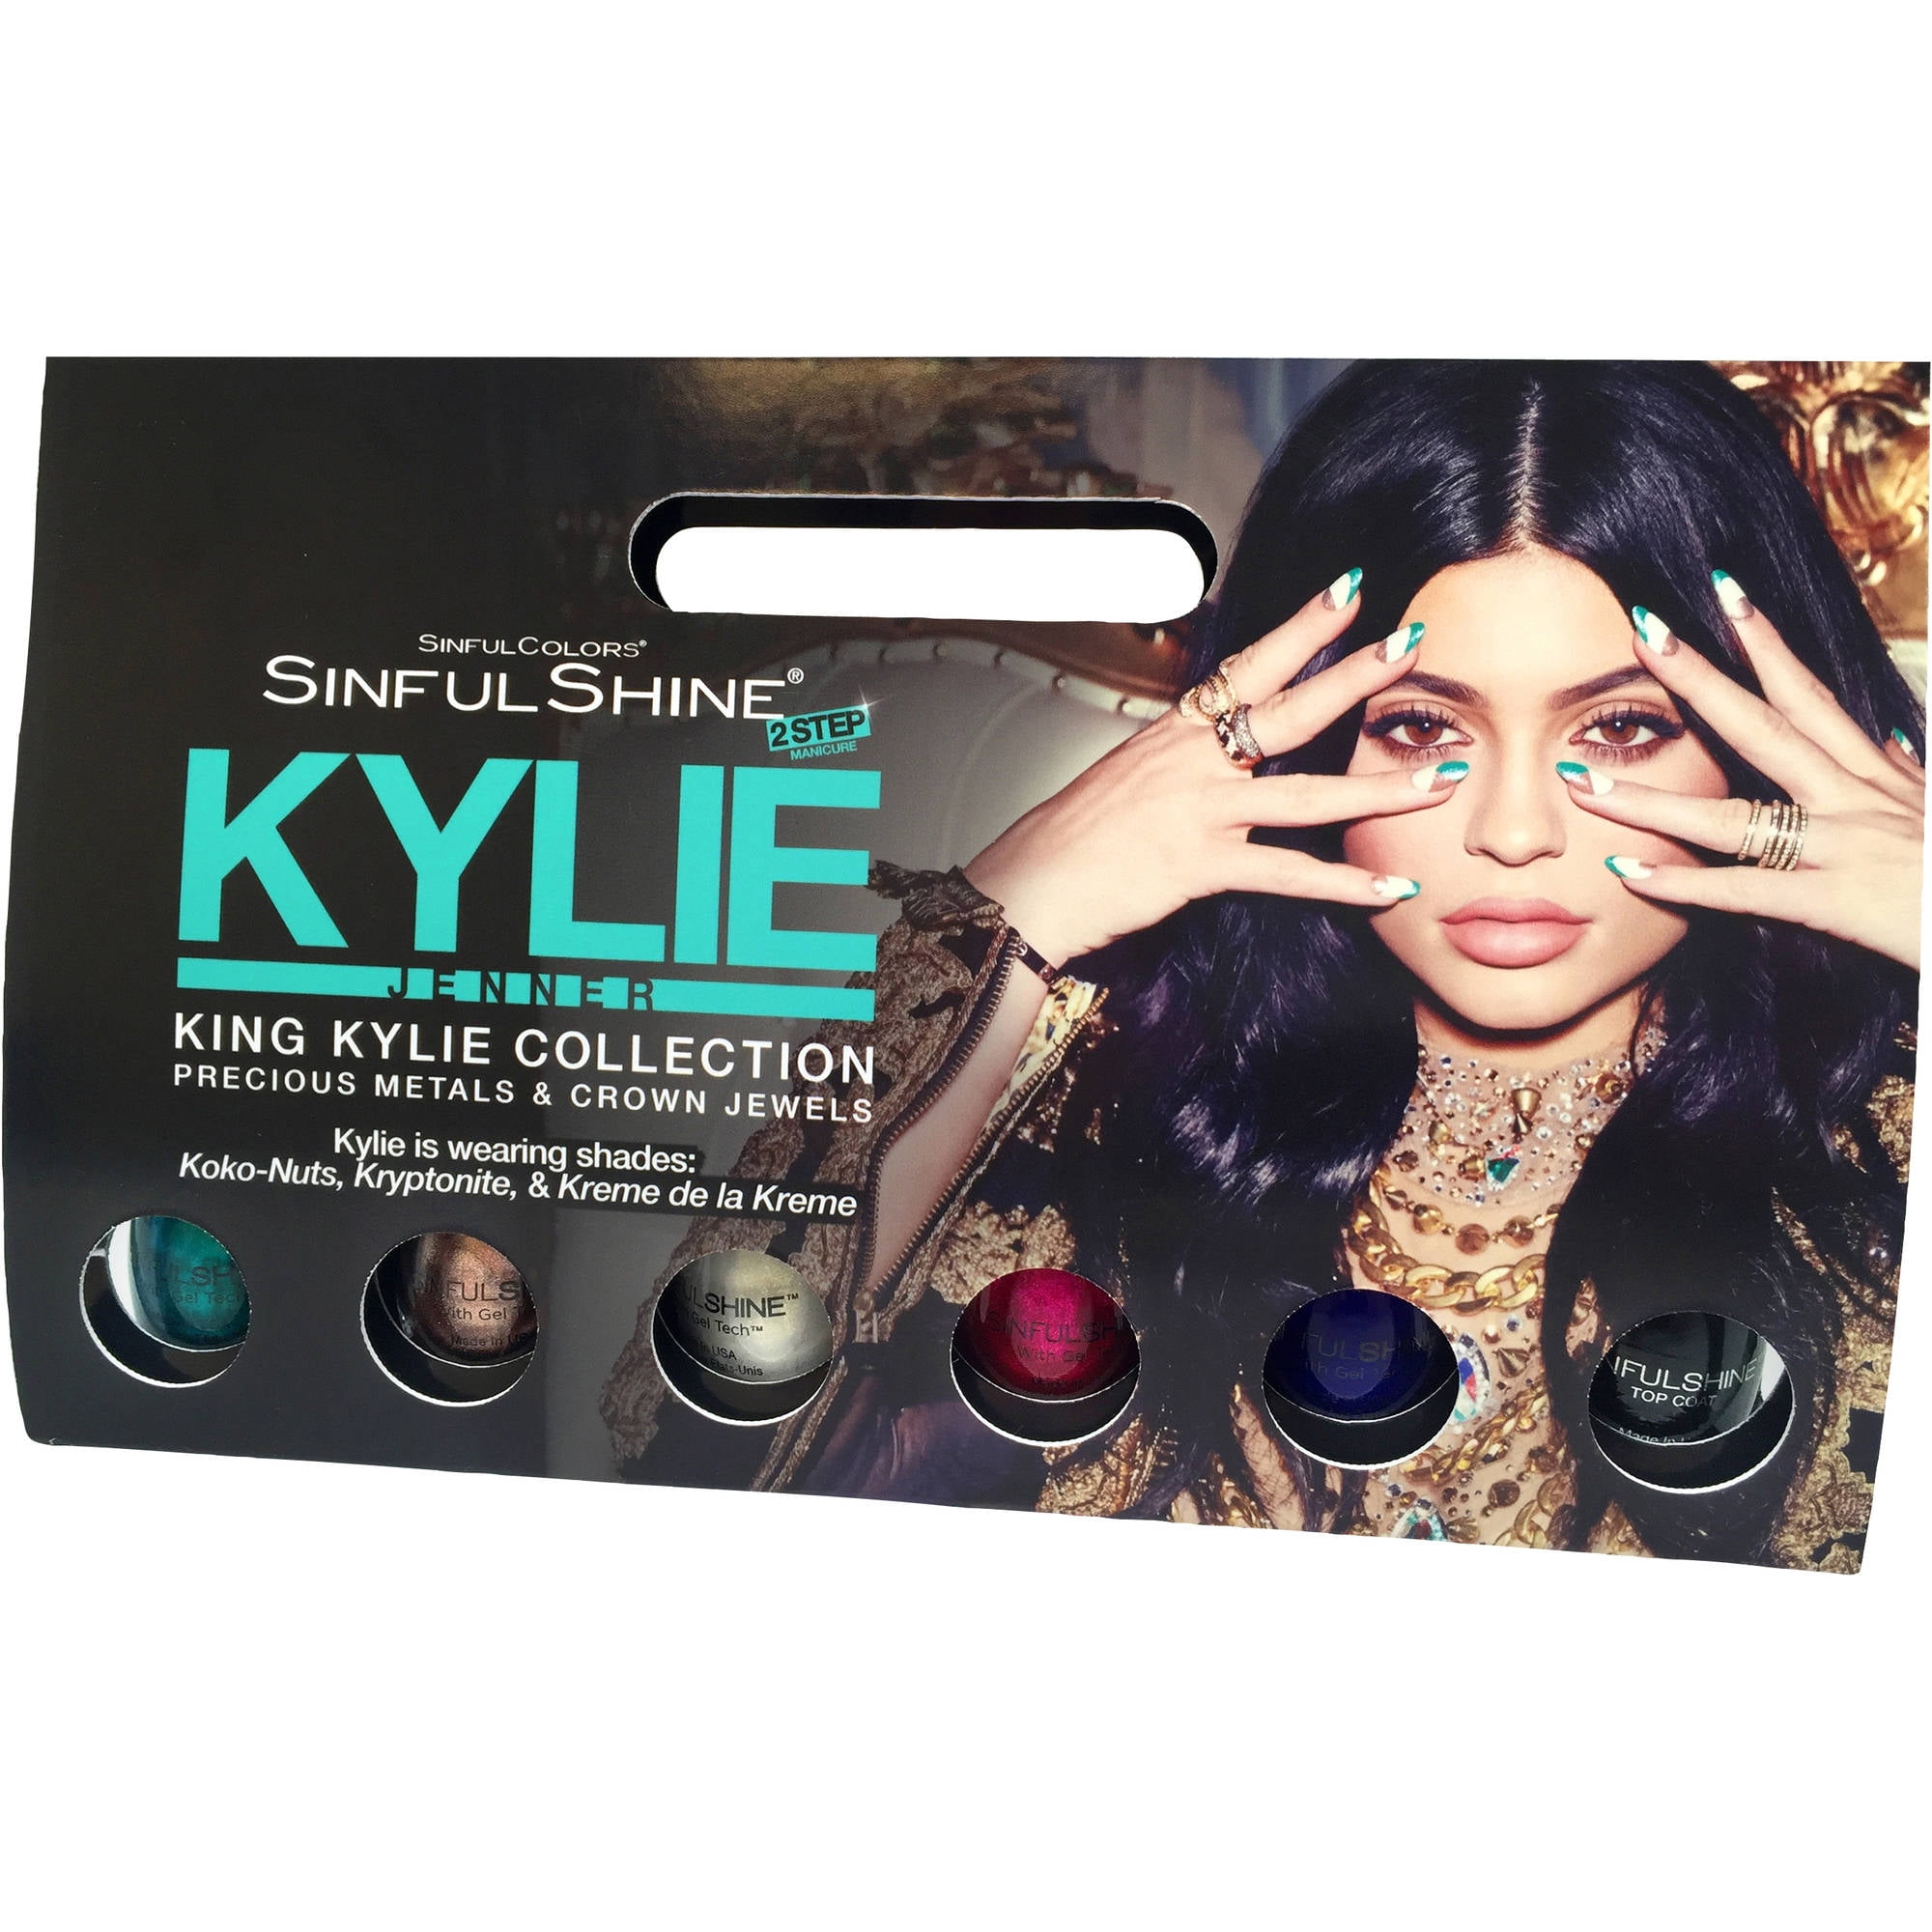 Kylie Jenner's Nail Polish Line Will Be Your New Beauty Obsession